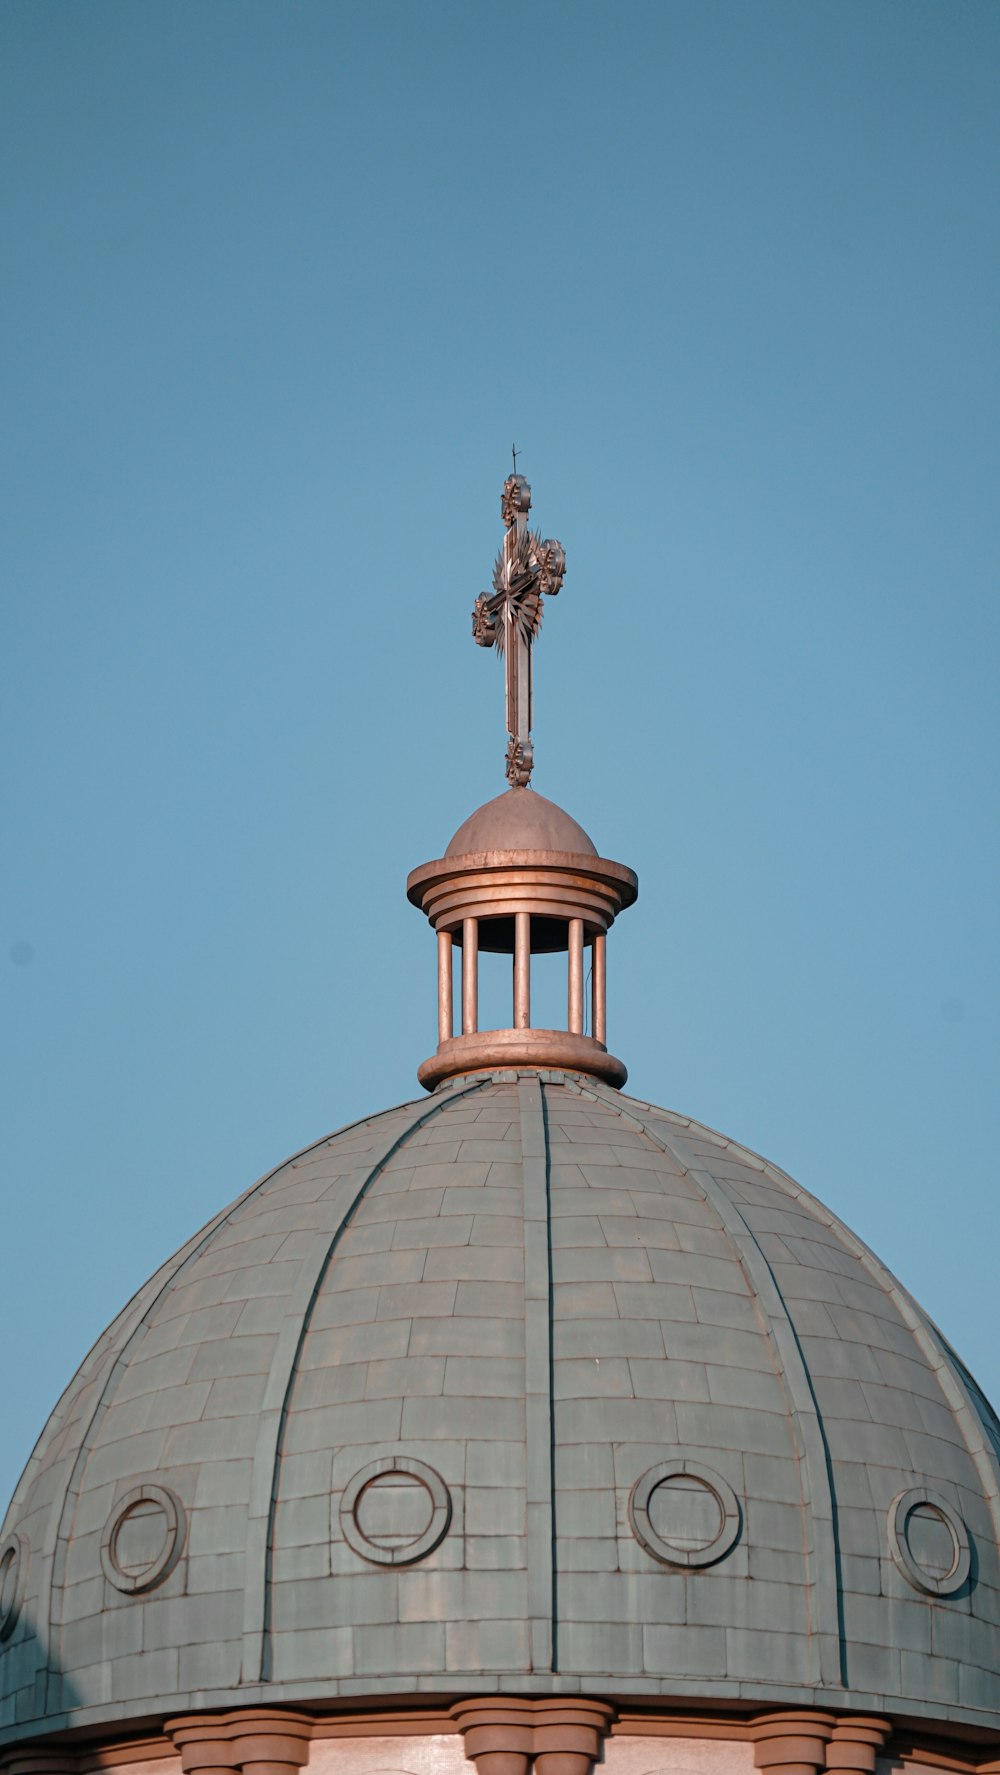 gold cross on top of gray and white dome building